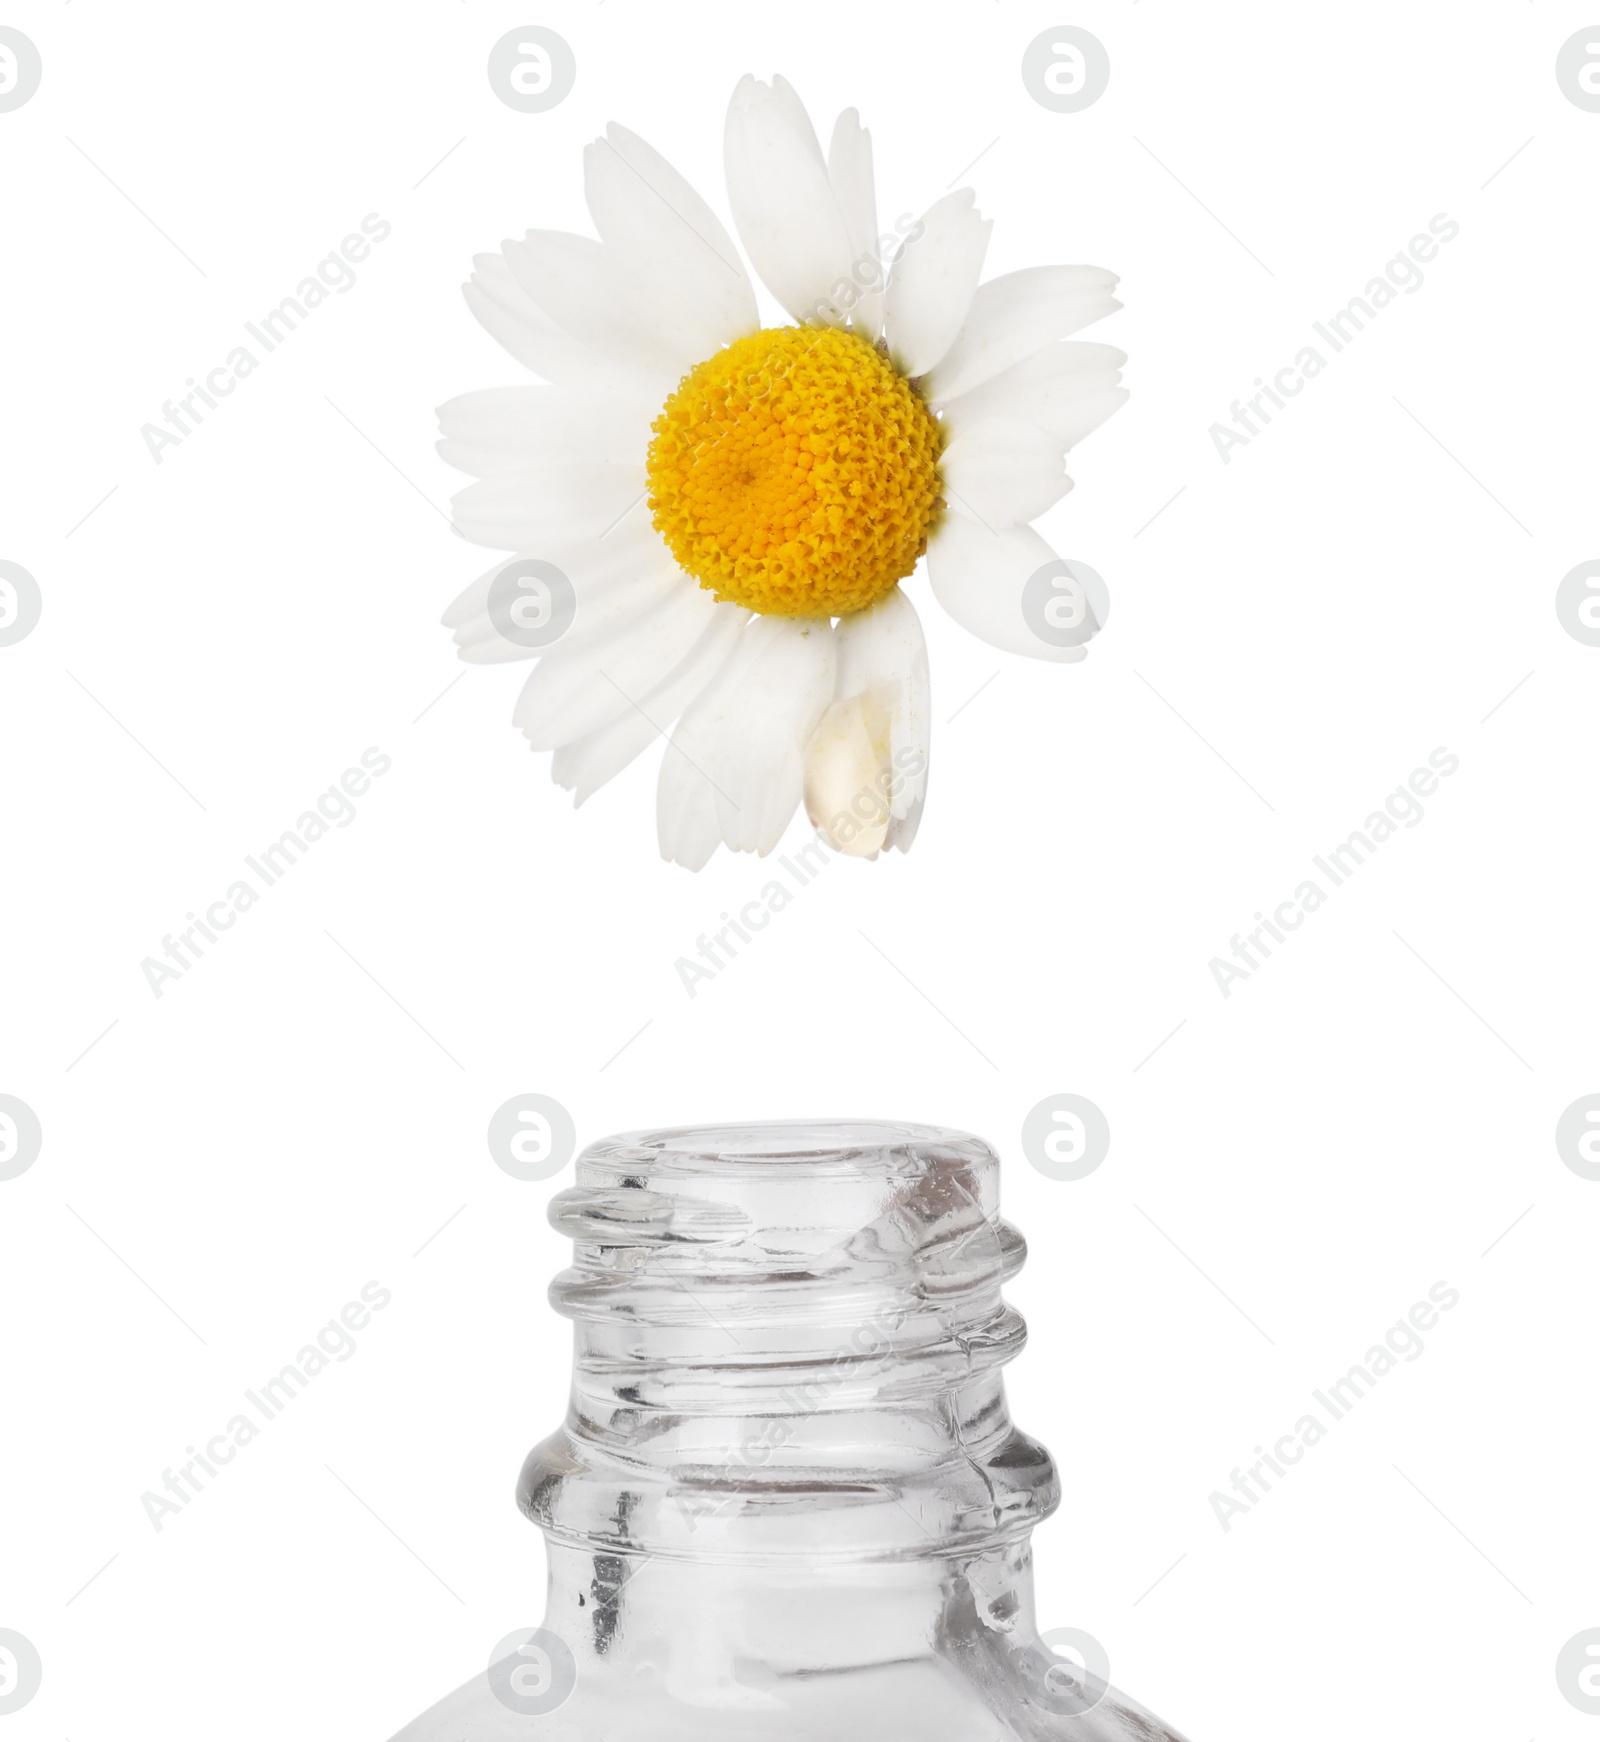 Photo of Essential oil dripping from chamomile petal into glass bottle on white background